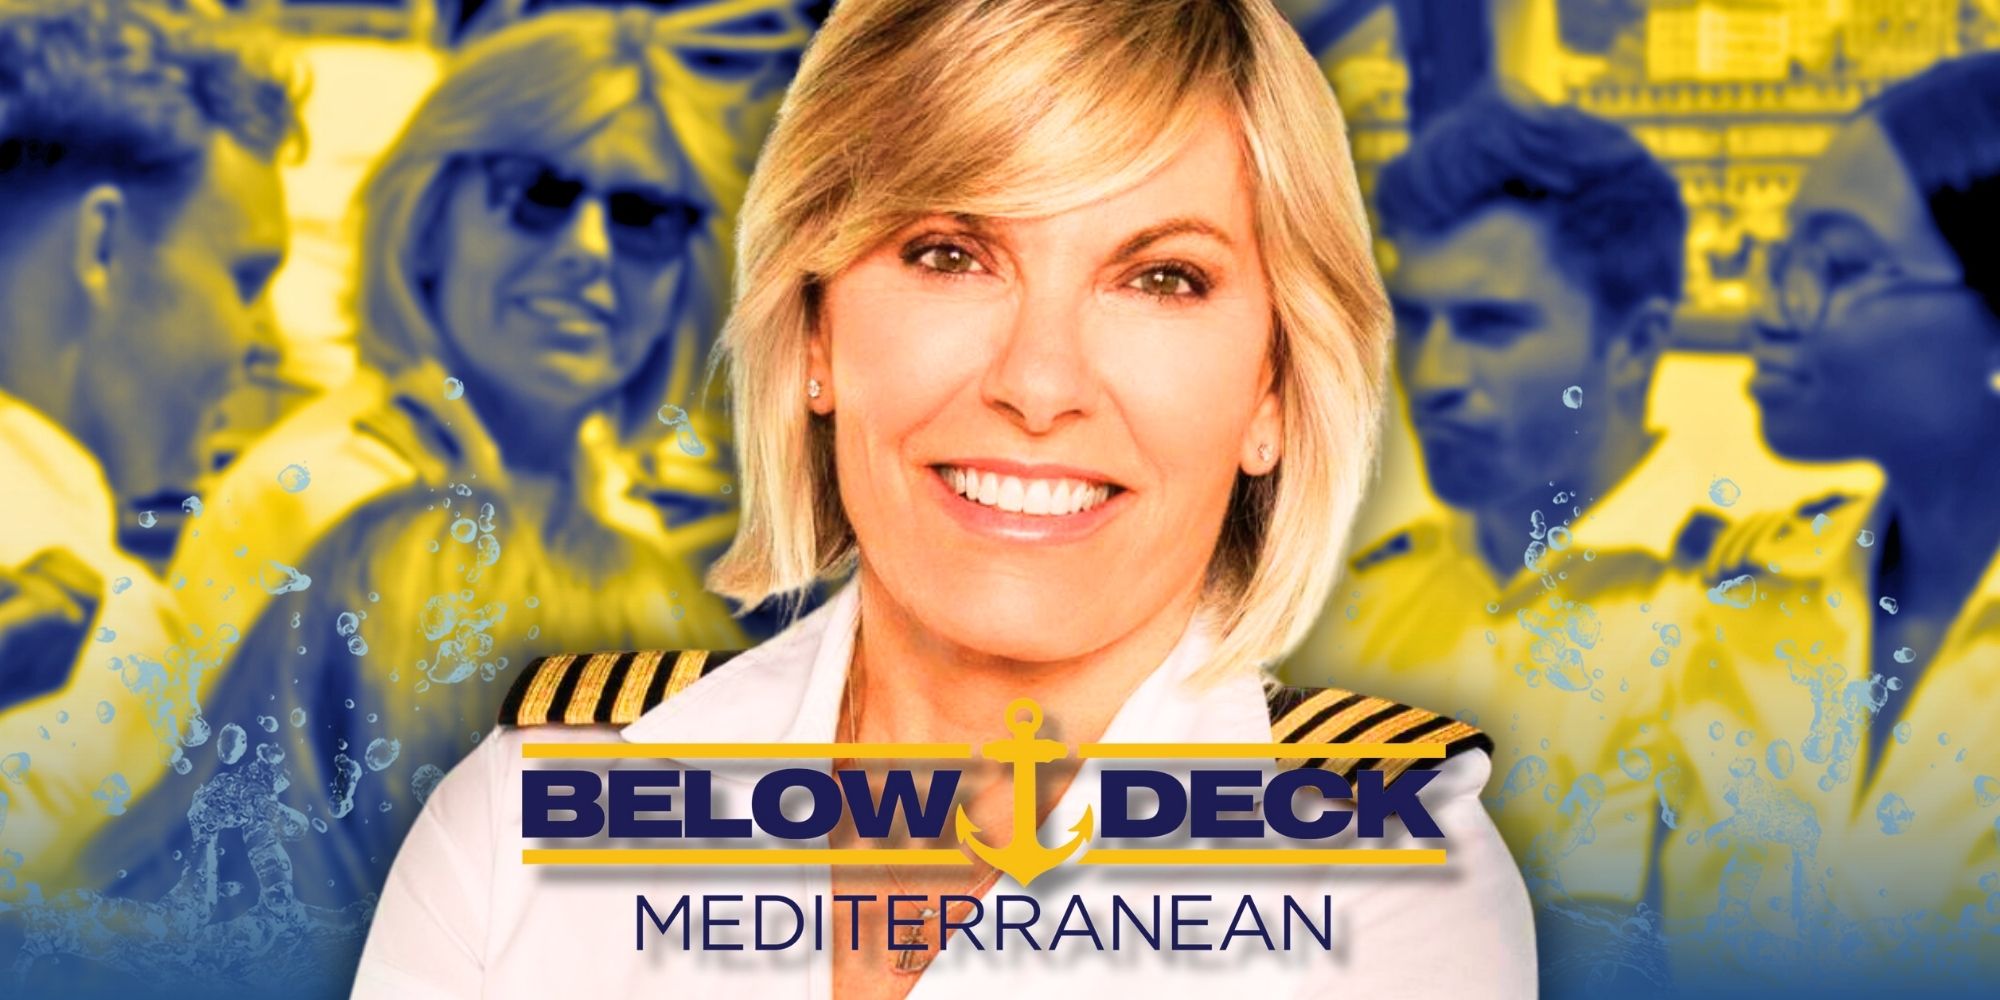 Below Deck Mediterranean Season 8 cast with Captain Sandy in the front and the logo, blue and yellow filtered background